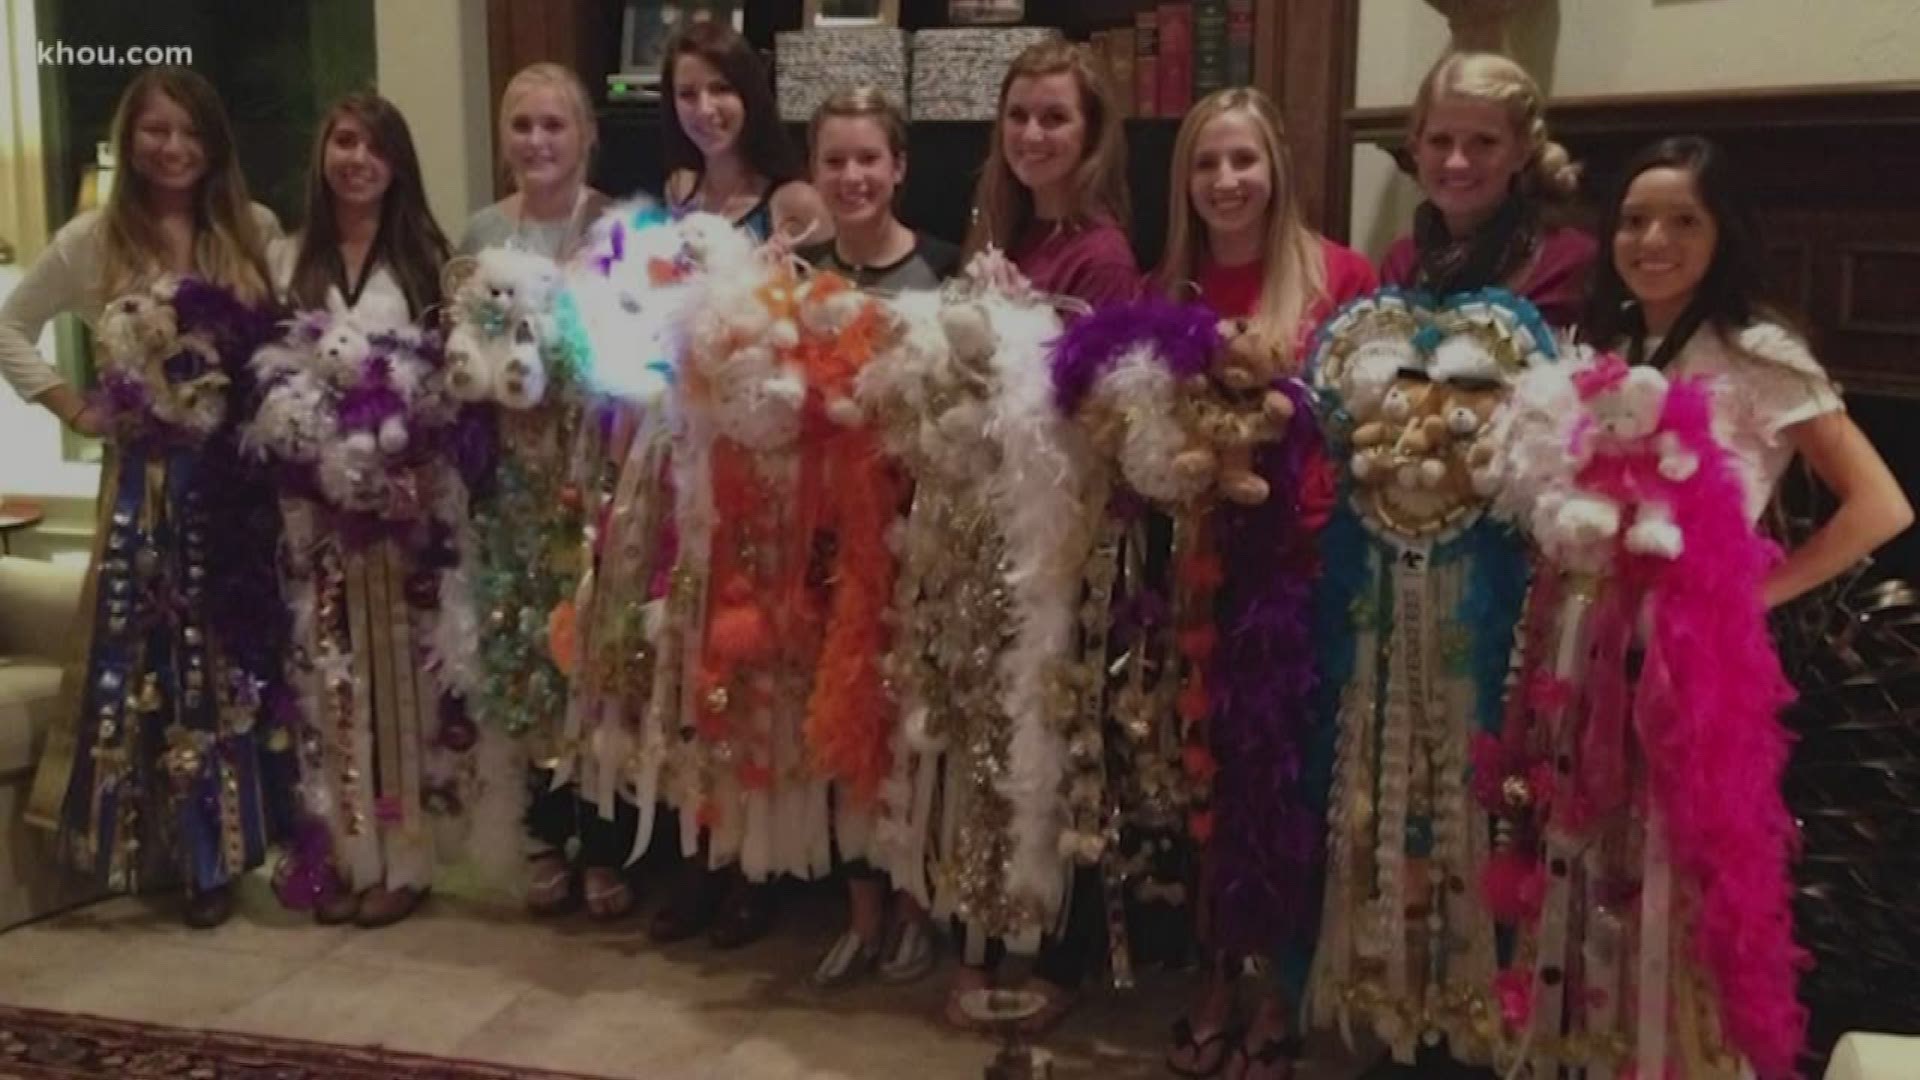 A Spring "mum-maker extraordinaire" has been making homecoming dreams come true for high school students for years!